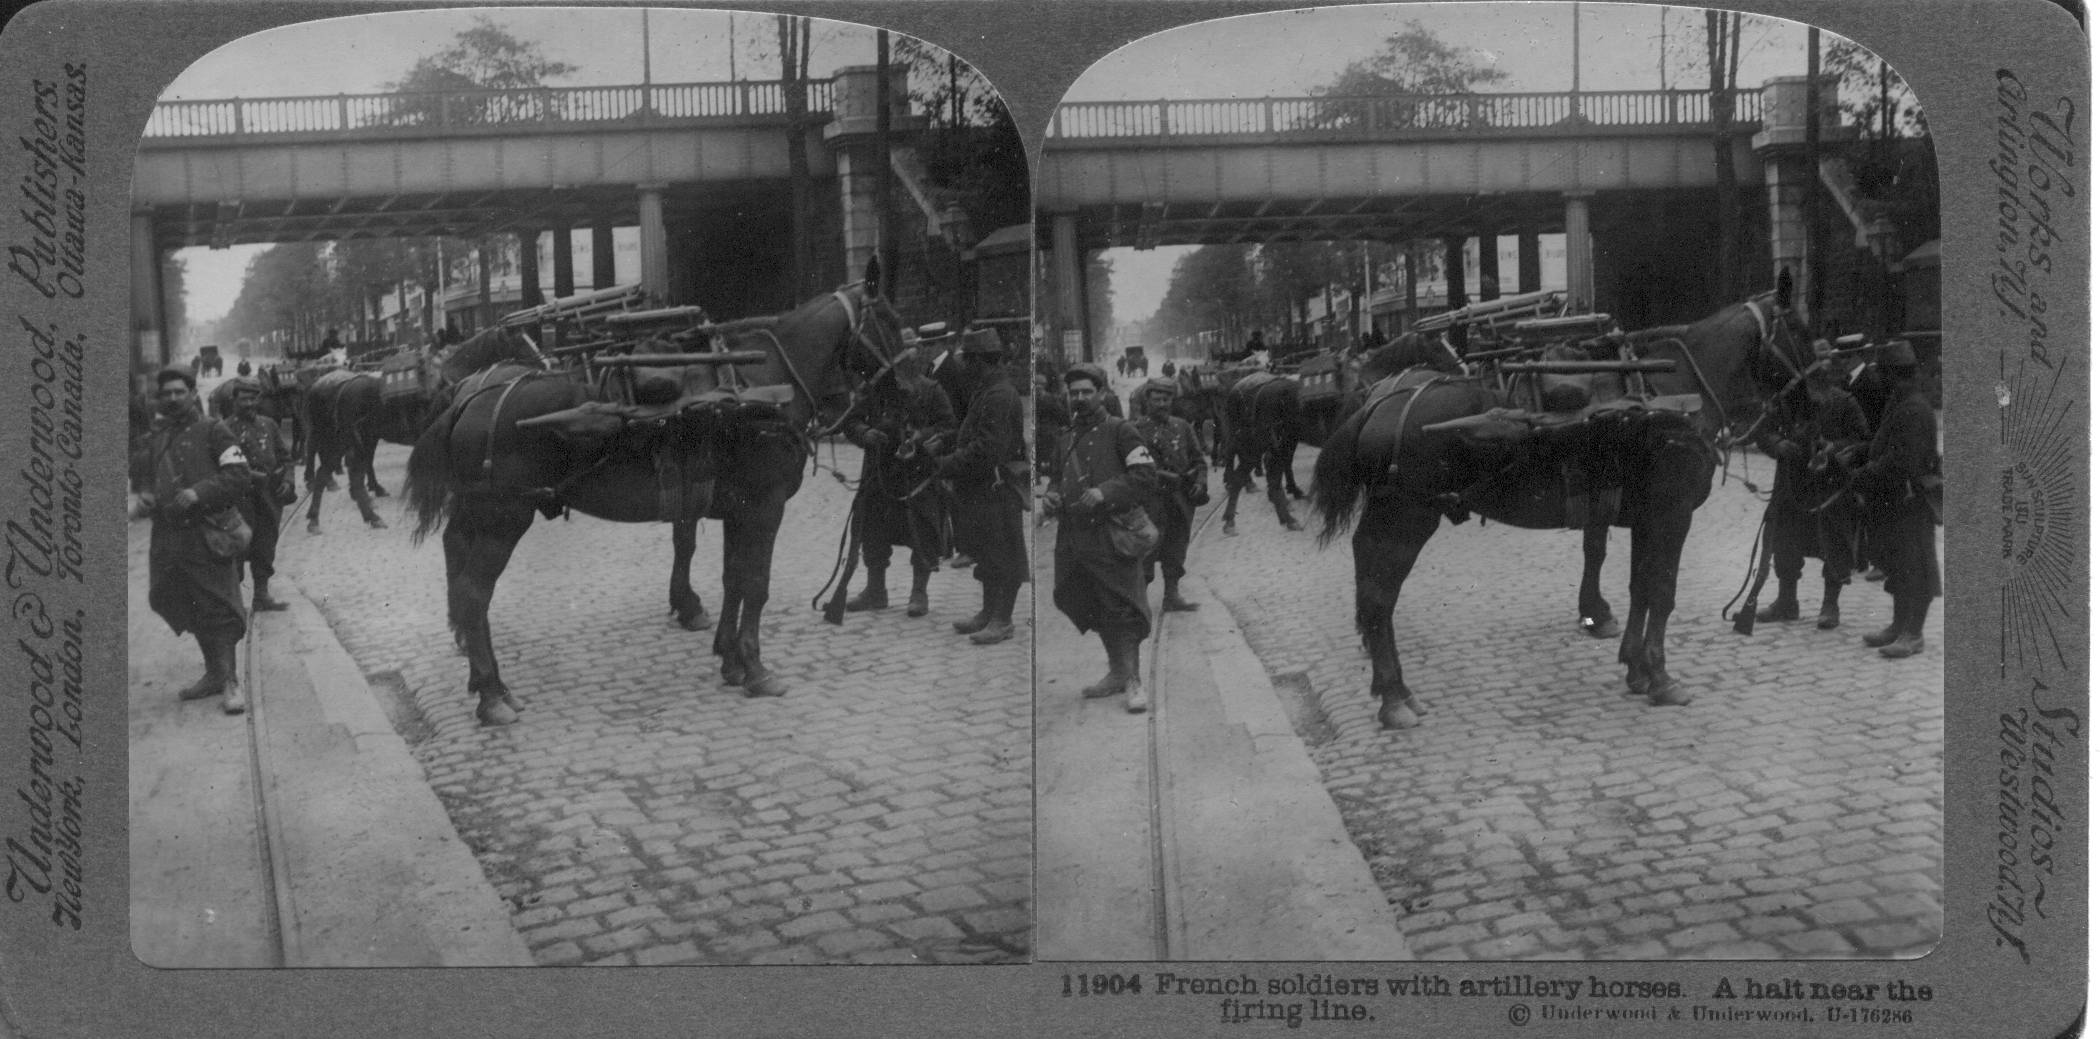 French soldiers with artillery horses. A halt near the firing line